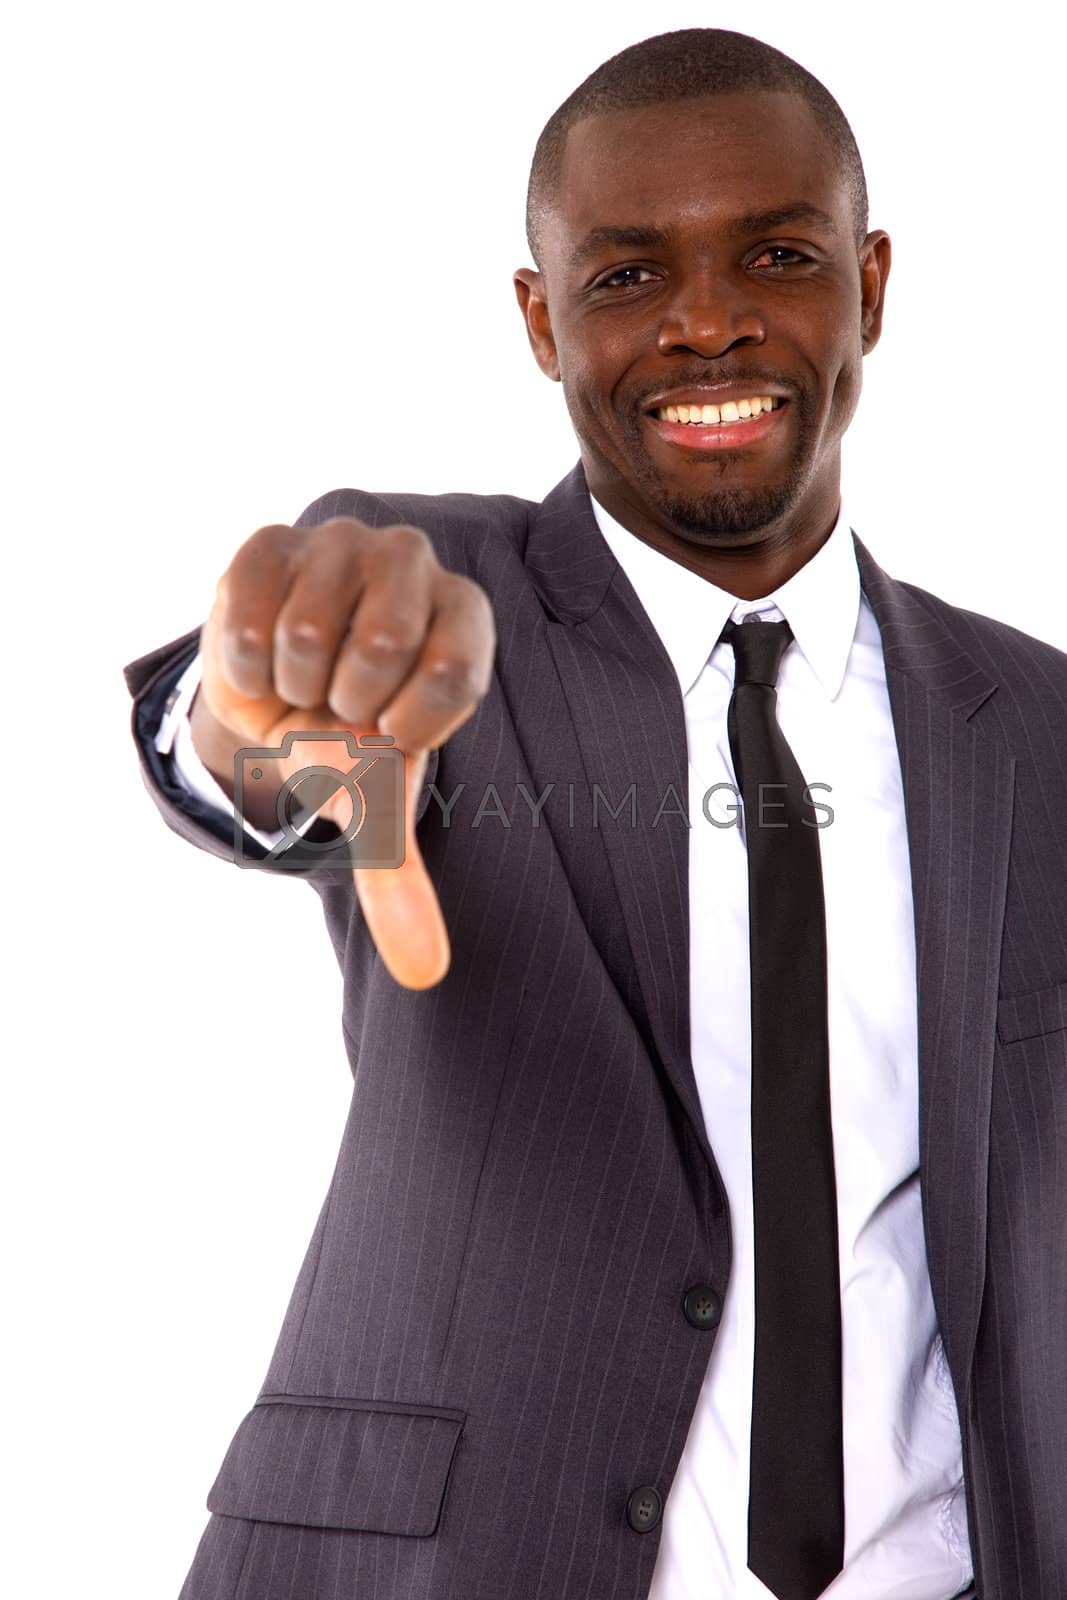 Royalty free image of businessman with thumb down by ambro